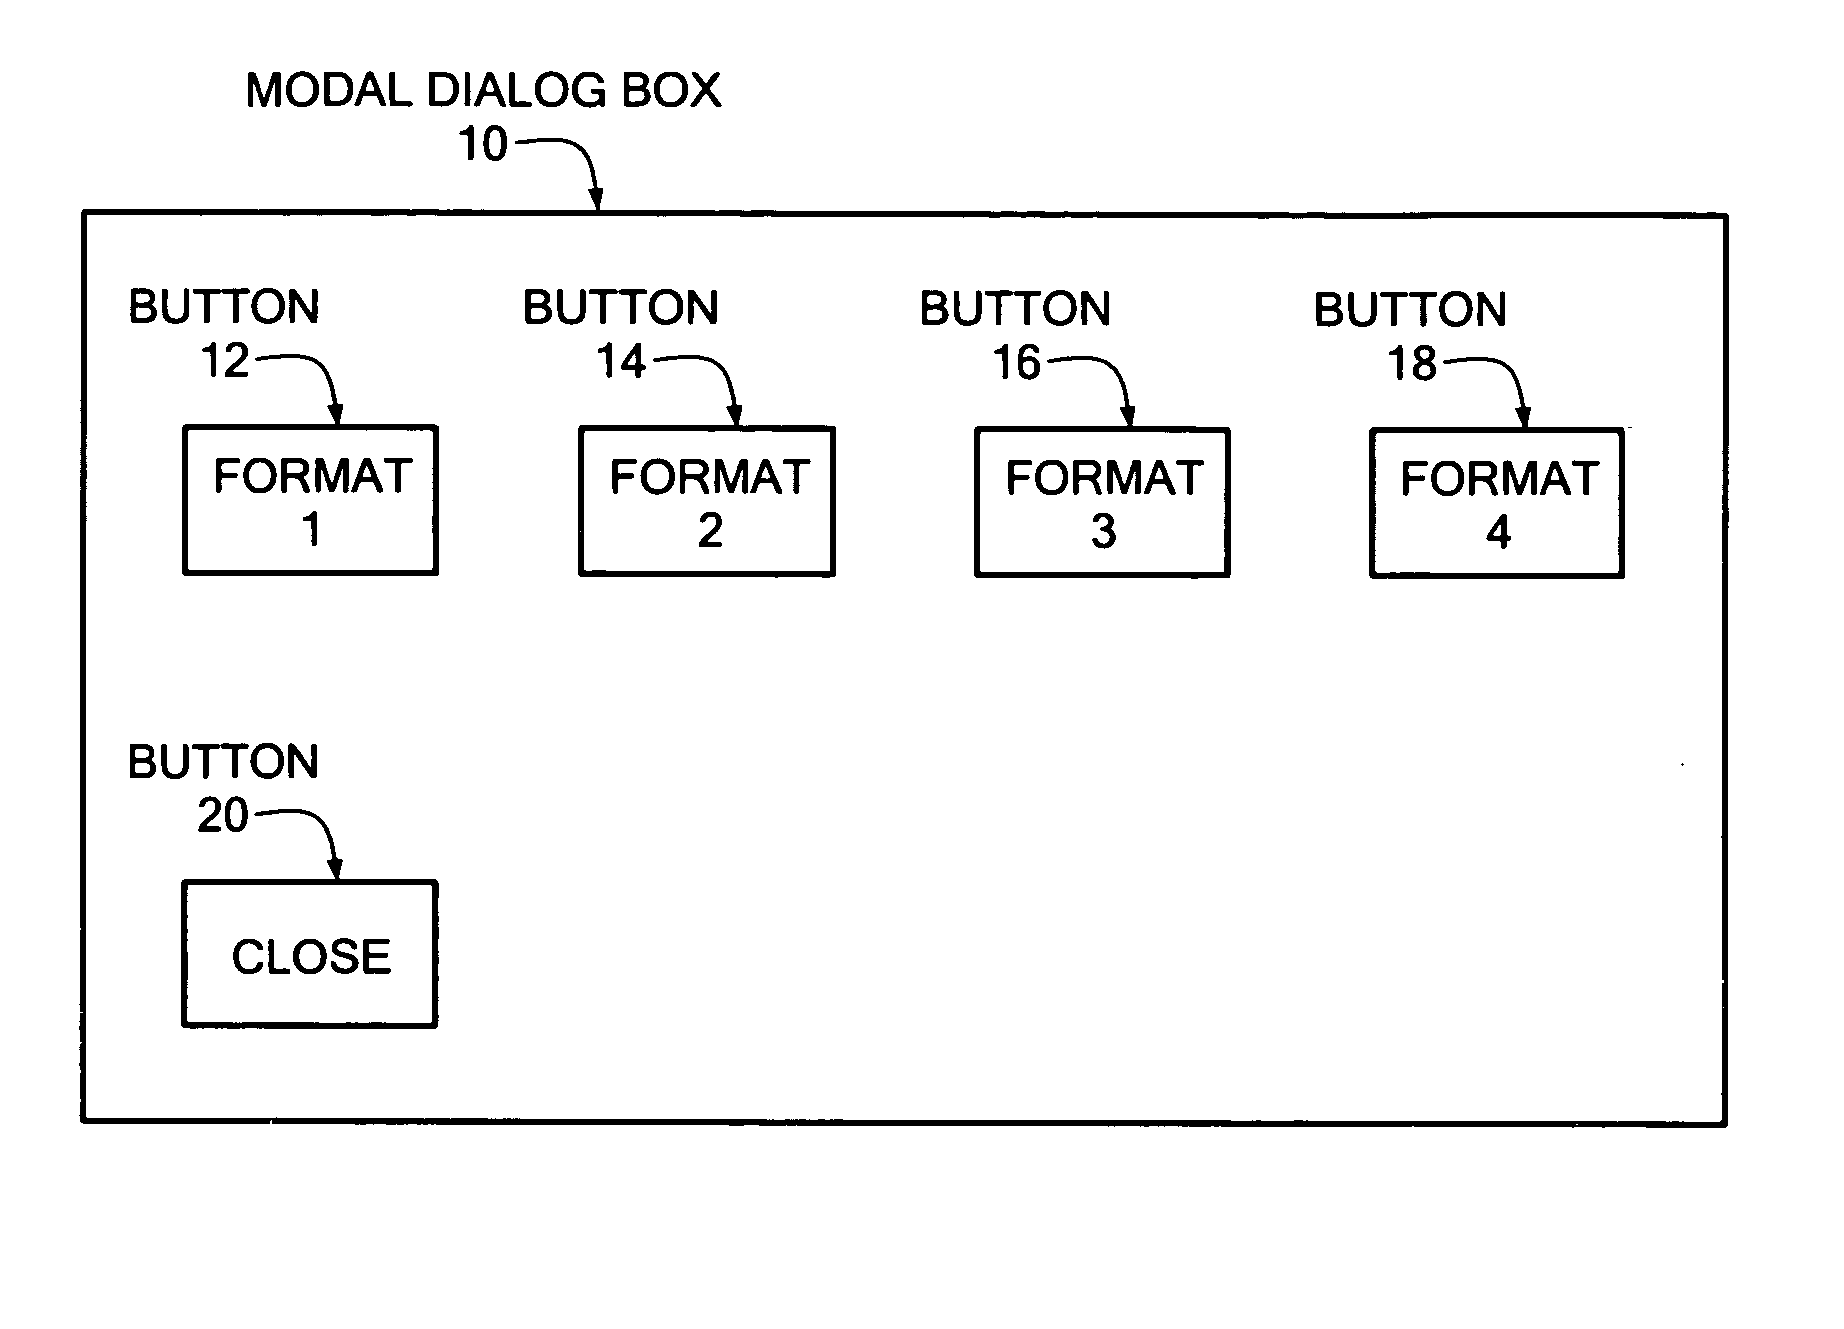 Method and system for providing an accessible object on a modal dialog box